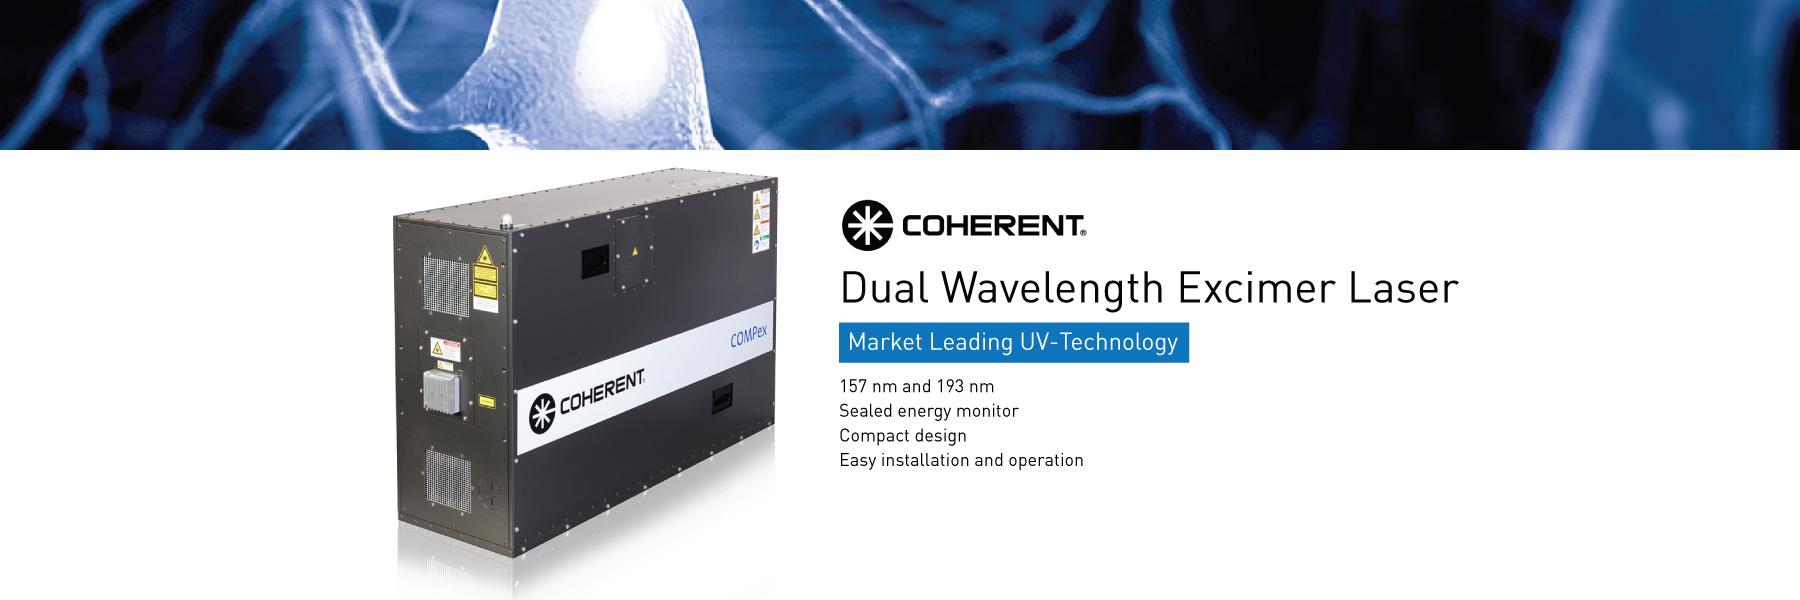 Coherent Dual Wavelength Excimer